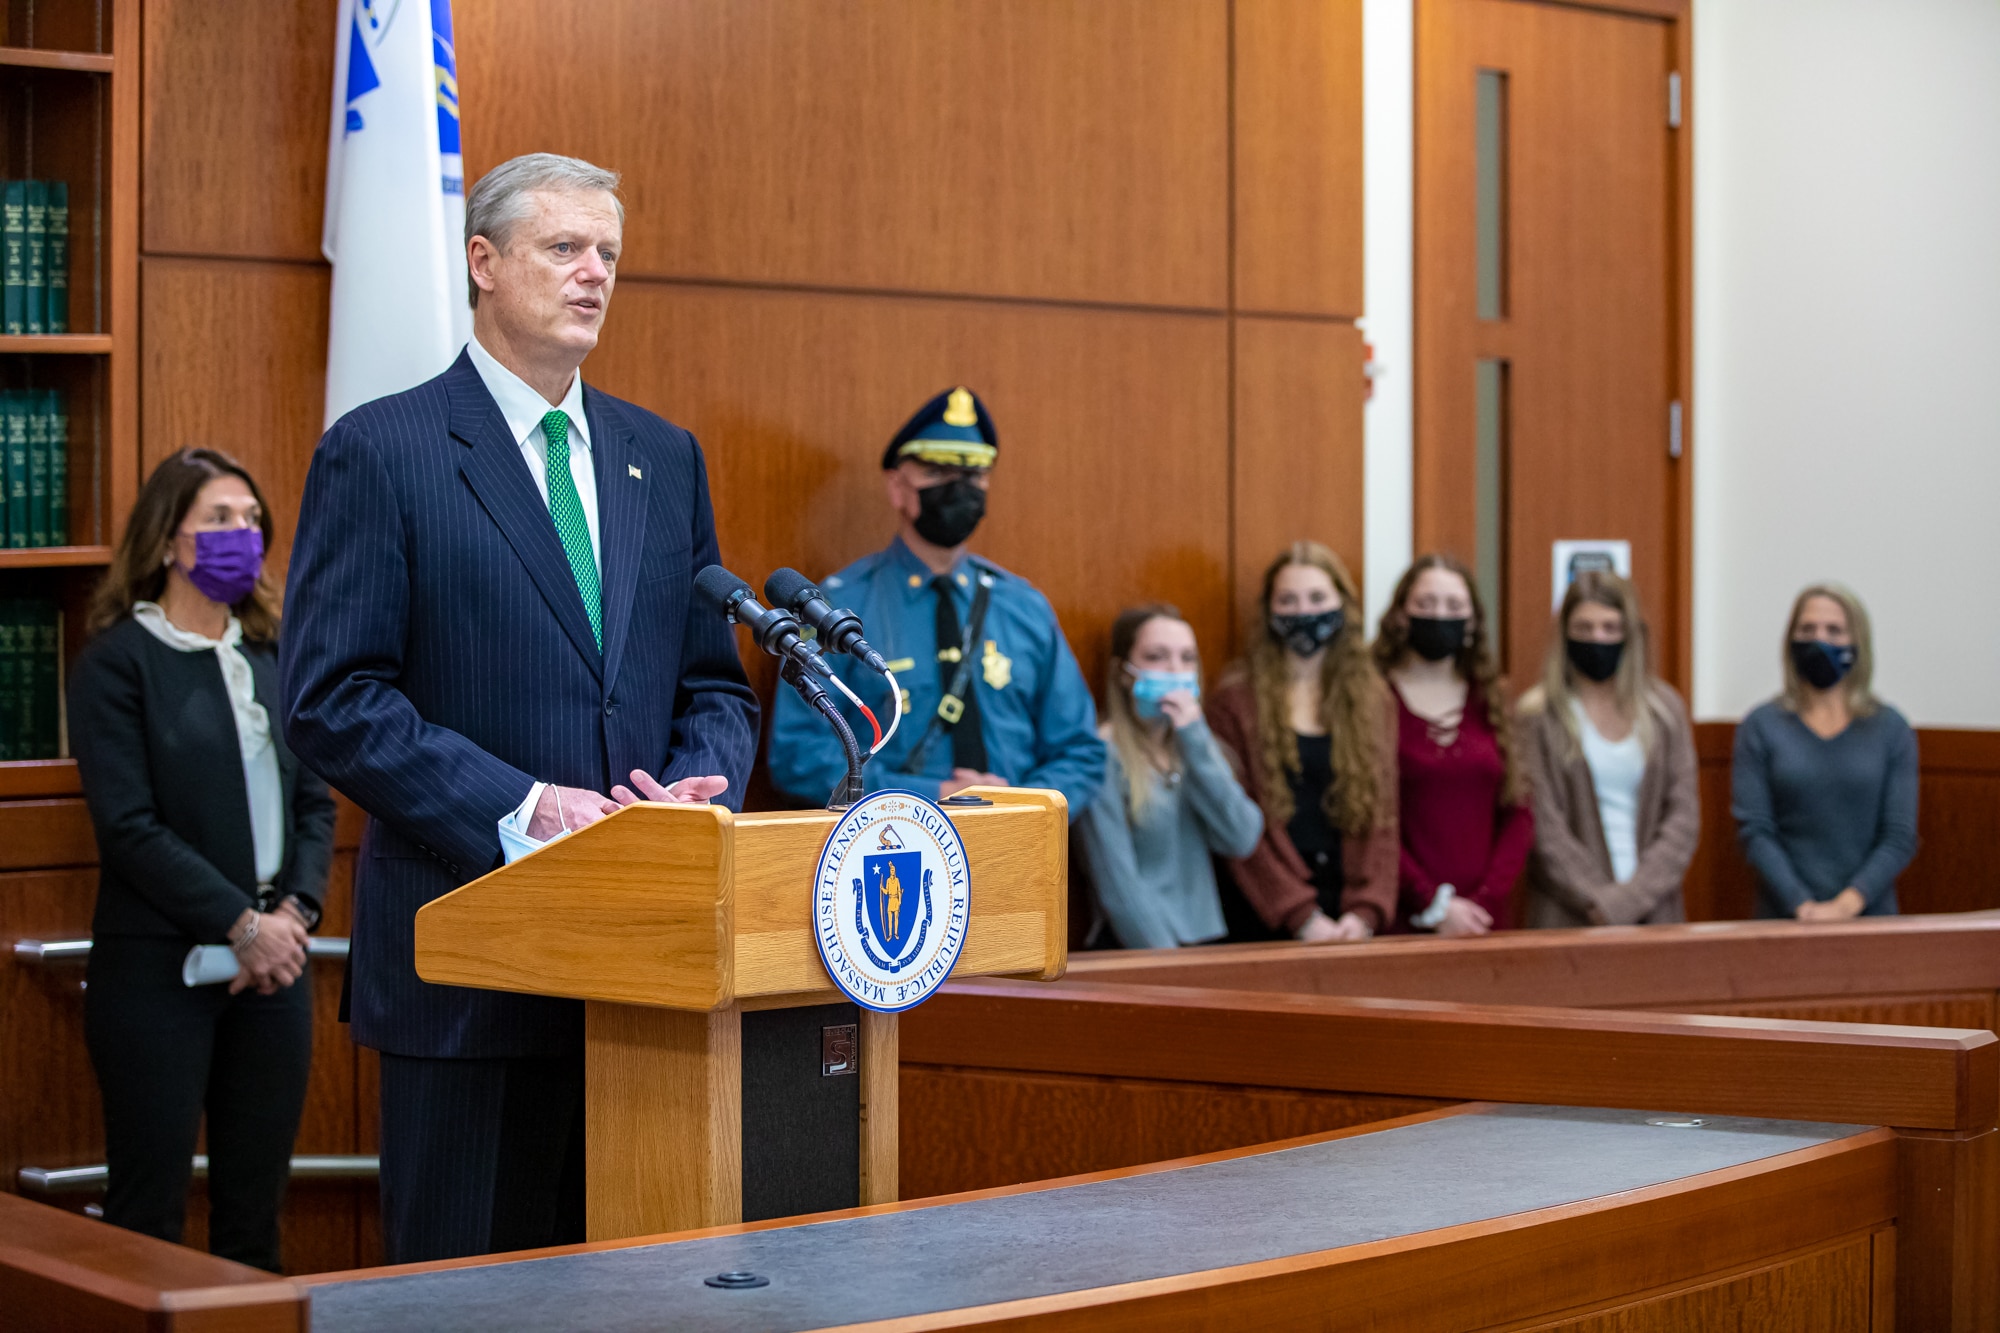 Baker-Polito Administration Refiles Legislation to Improve Roadway Safety and Combat Impaired Driving